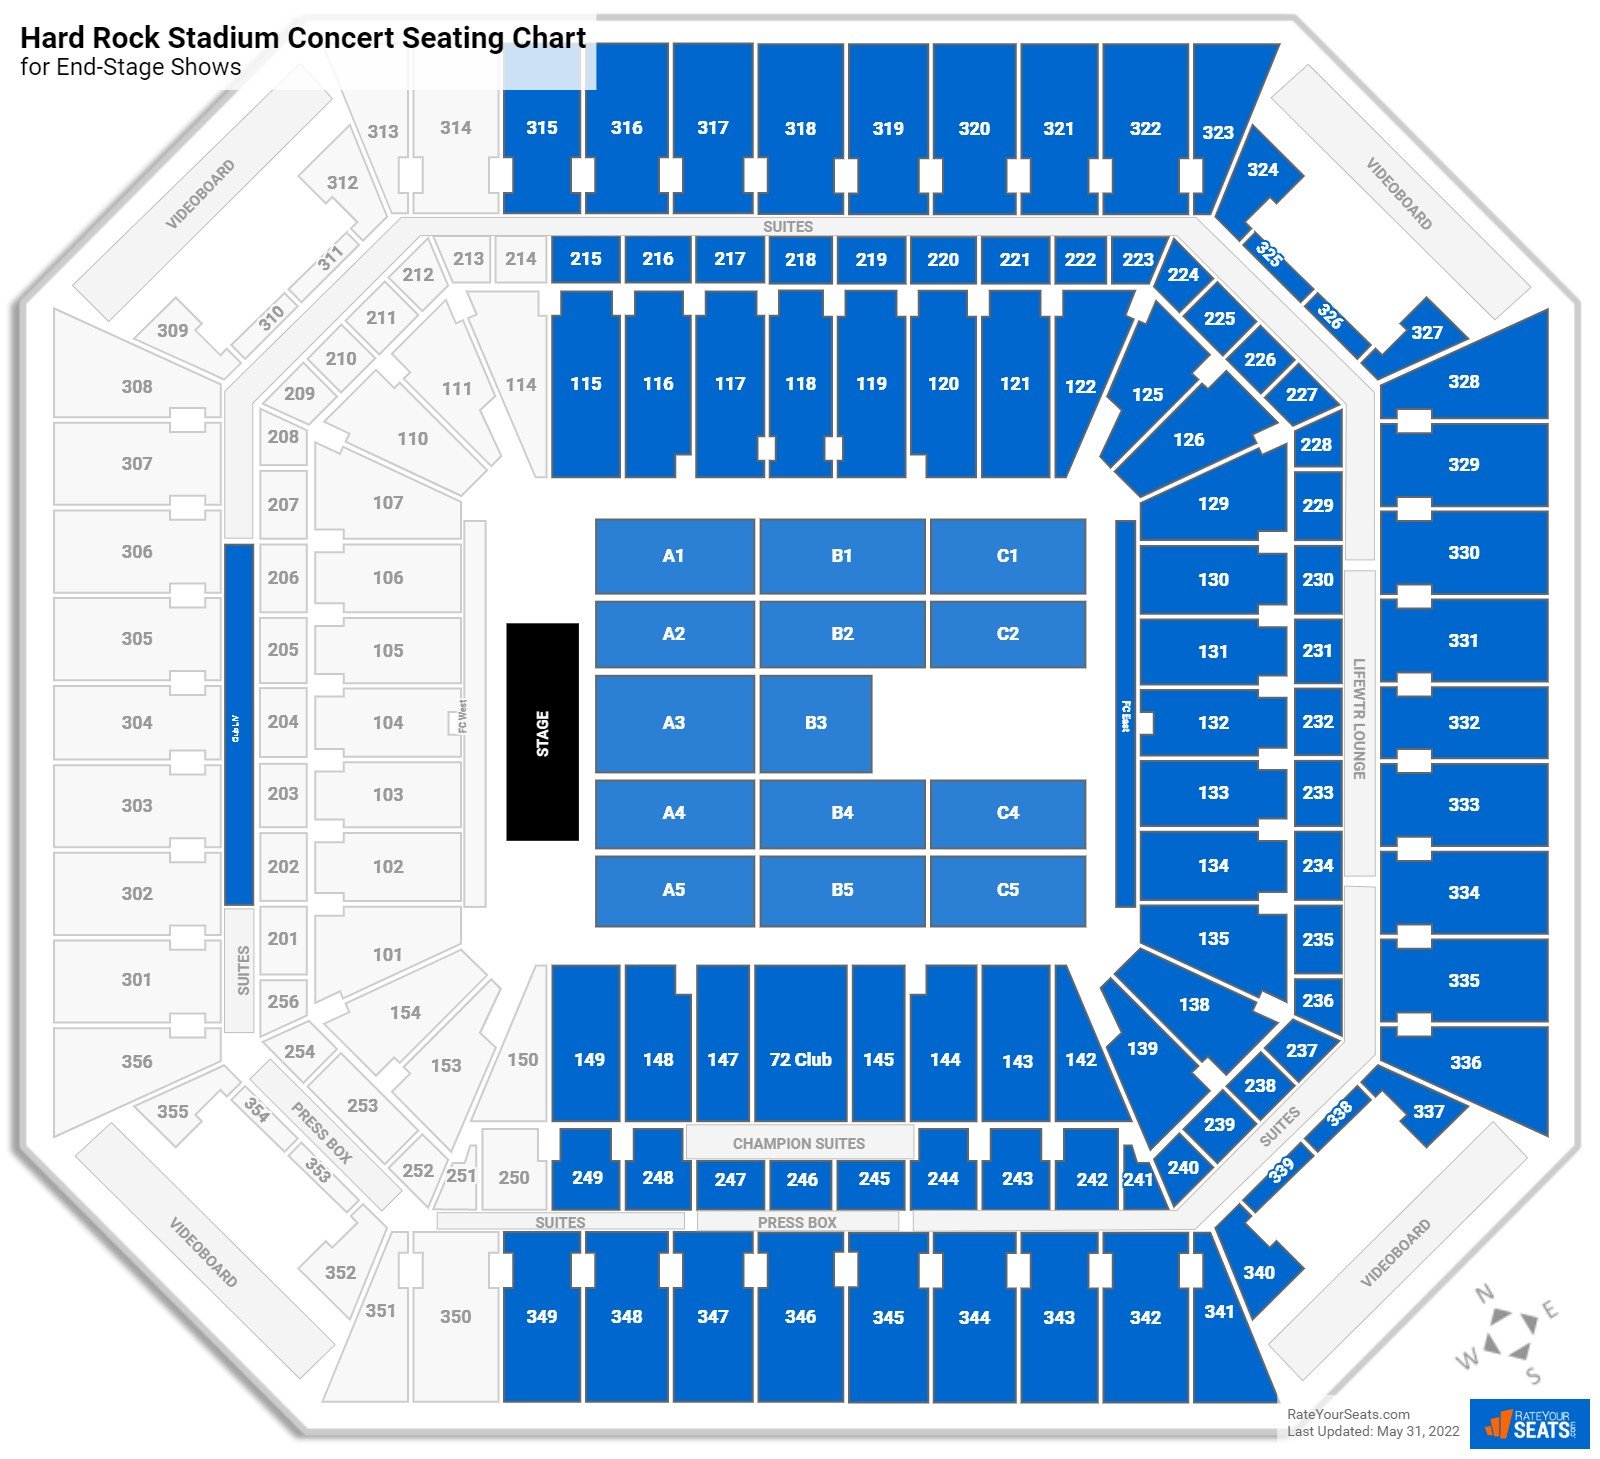 Hard Rock Stadium Concert Seating Chart For End Stage Shows 